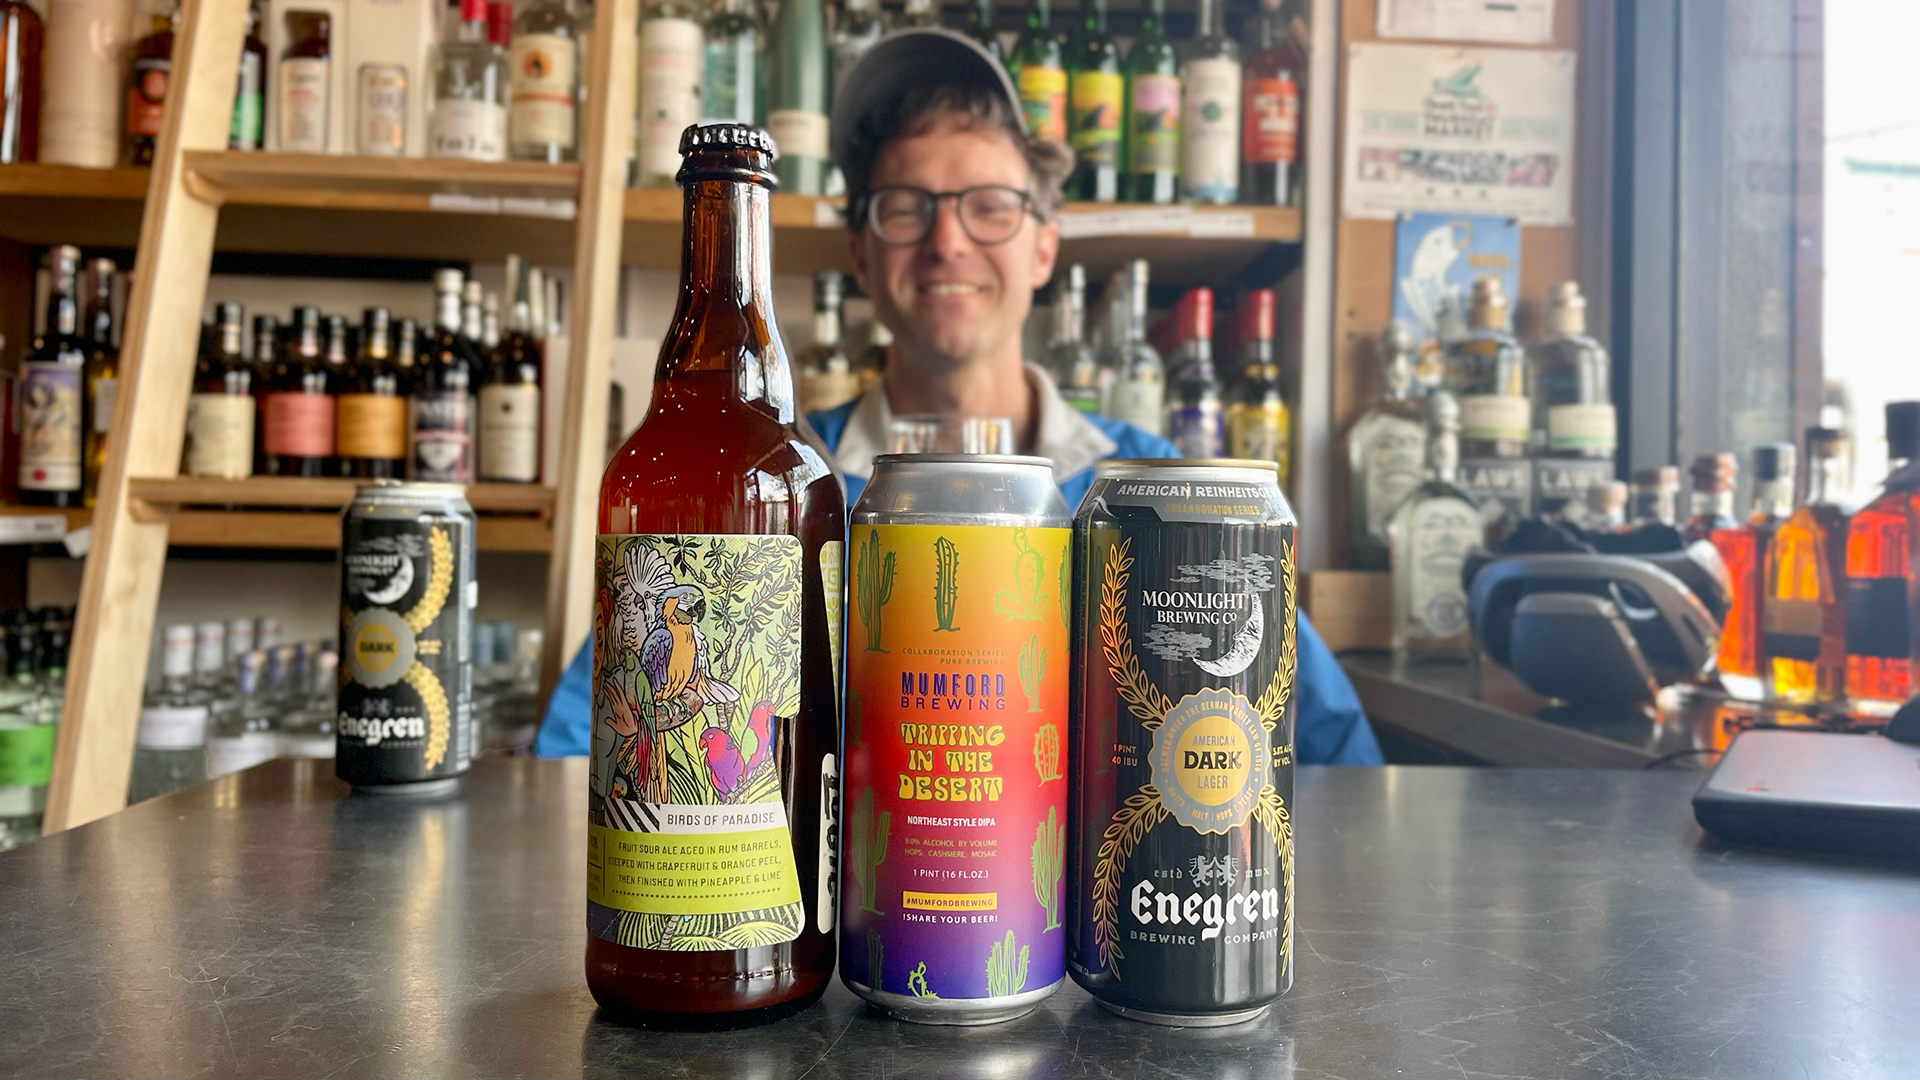 Beers of the week for April 25, 2022